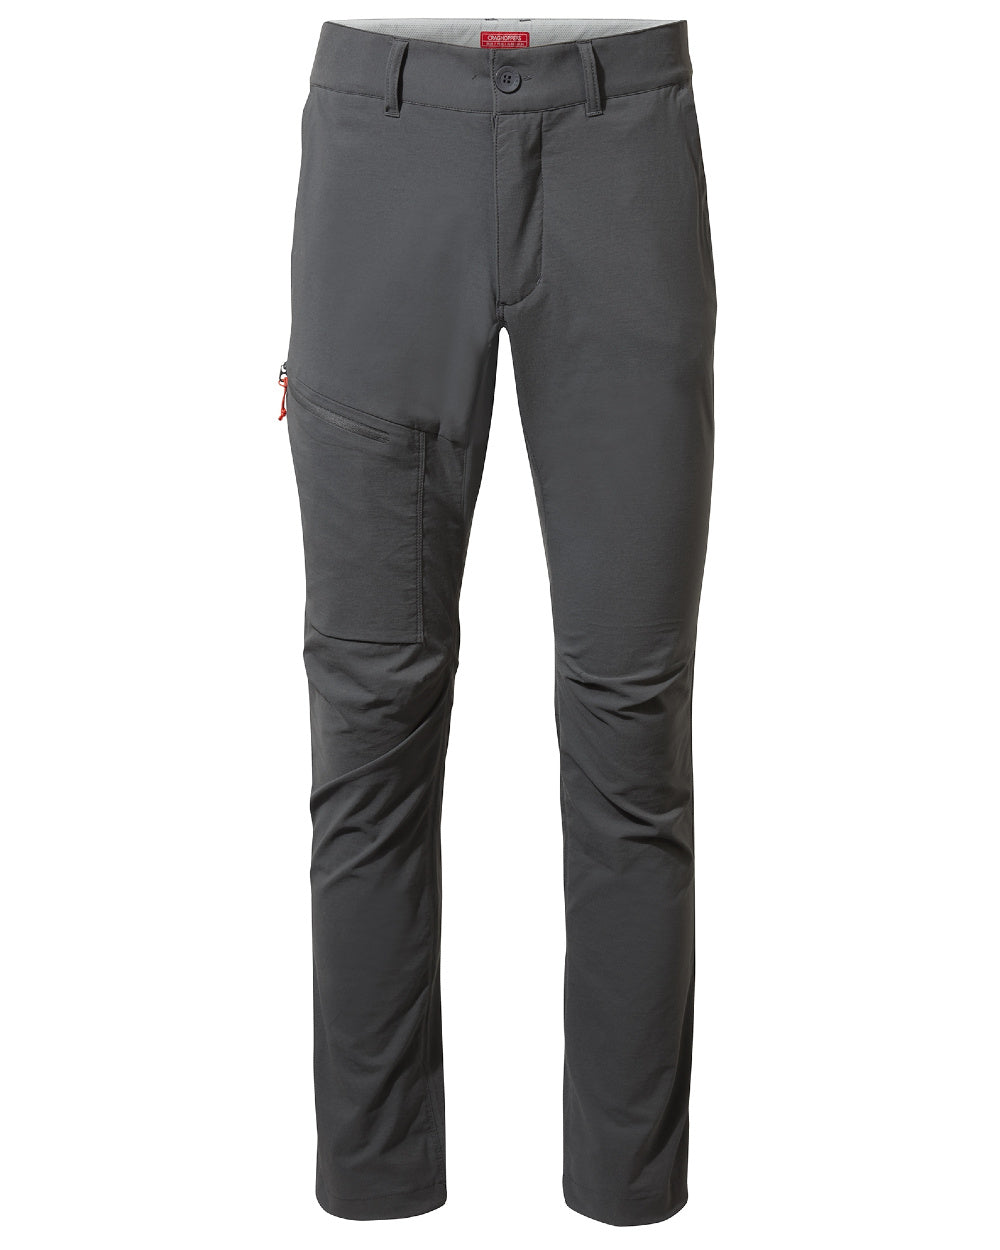 Dark Grey Coloured Craghoppers Mens NosiLife Pro Active Trousers On A White Background 